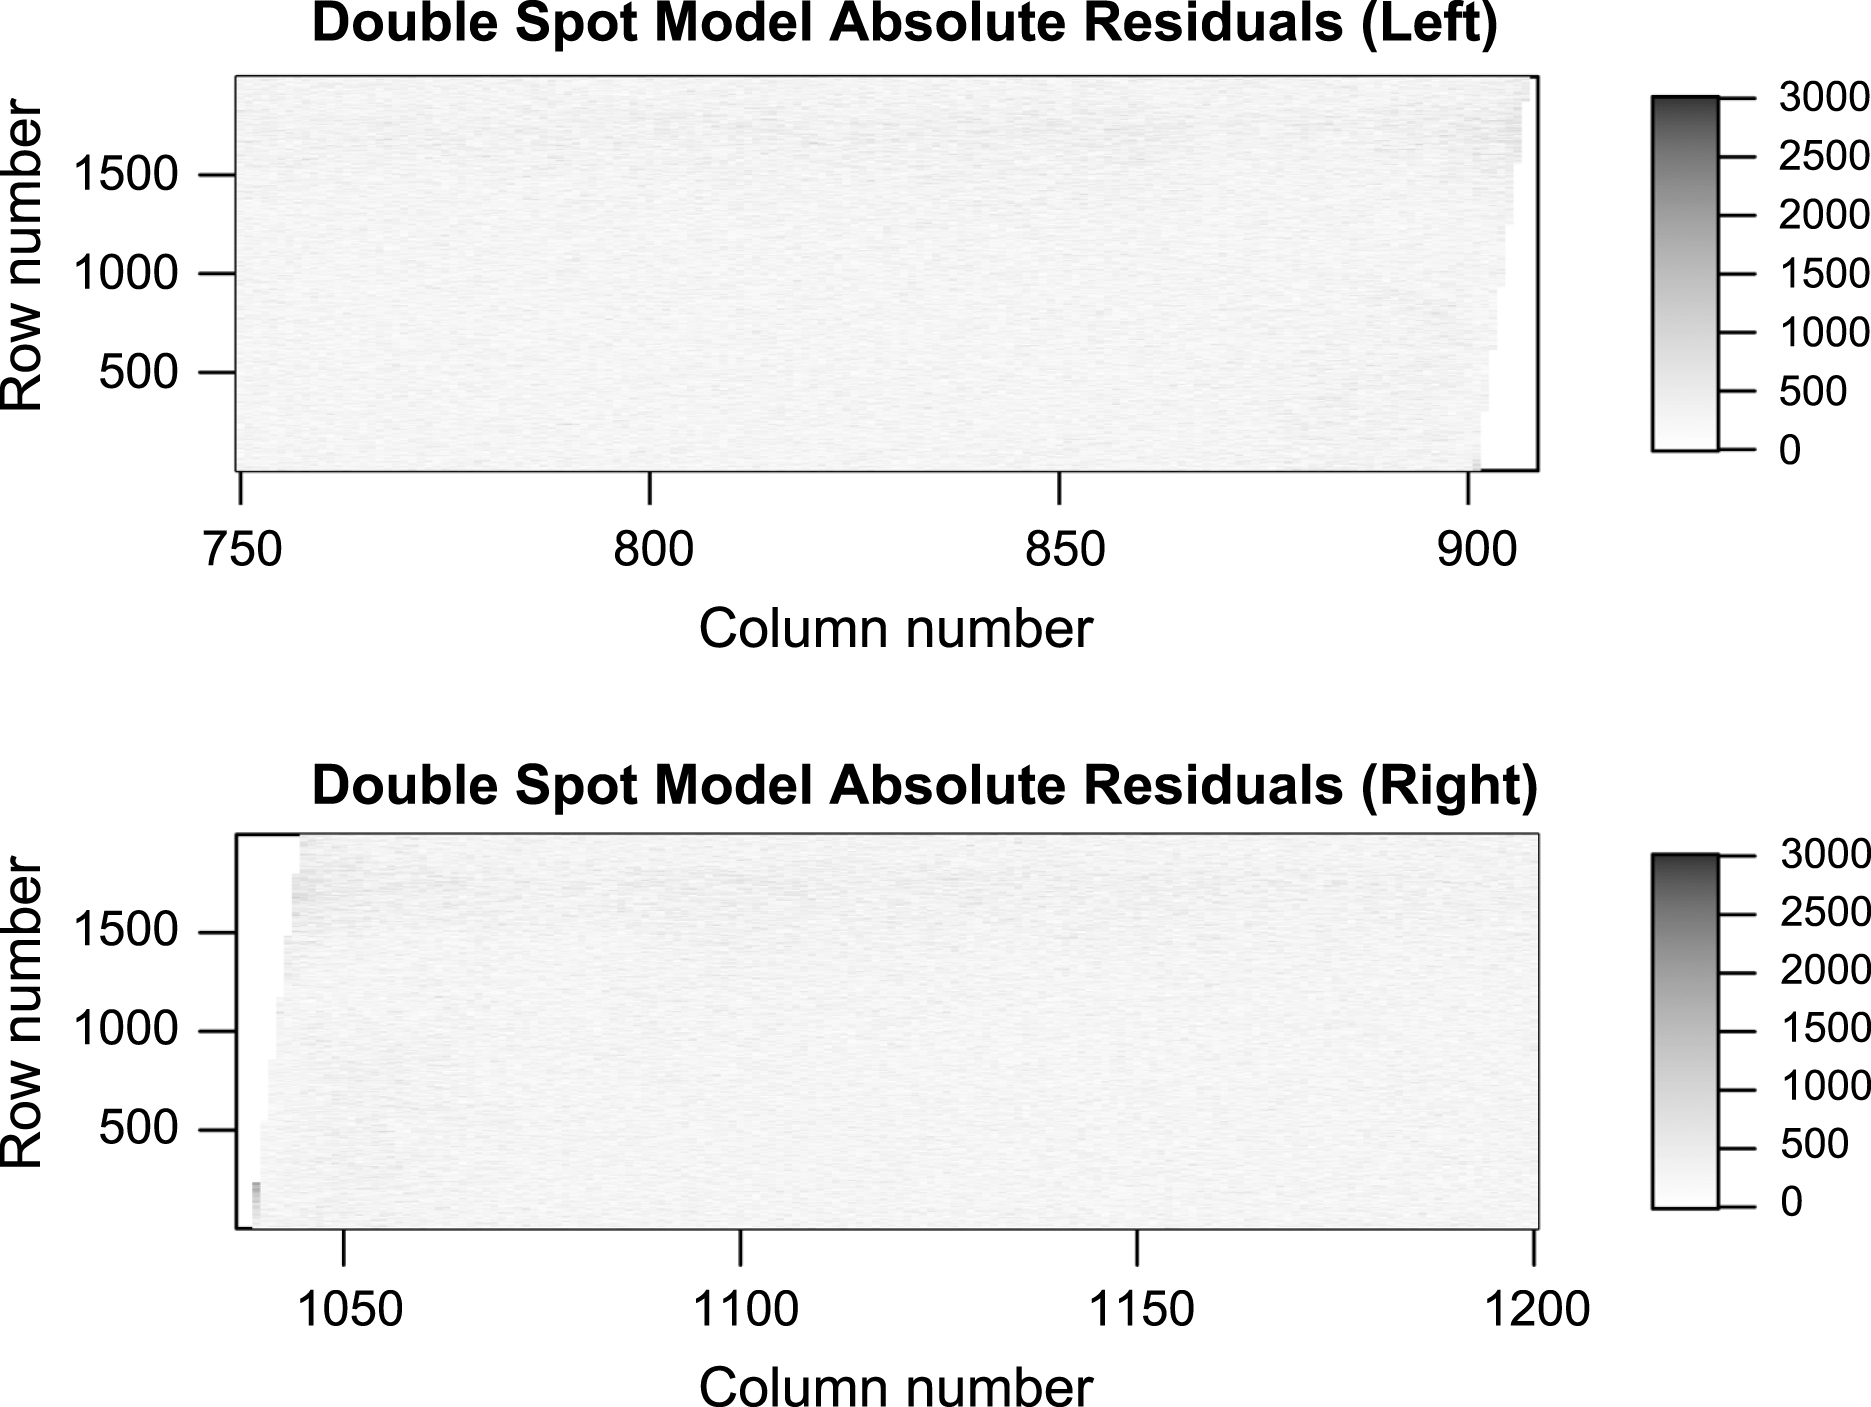 Absolute residuals of the mixture model. 
The residuals resemble white noise, so the model is adequate at explaining the data.